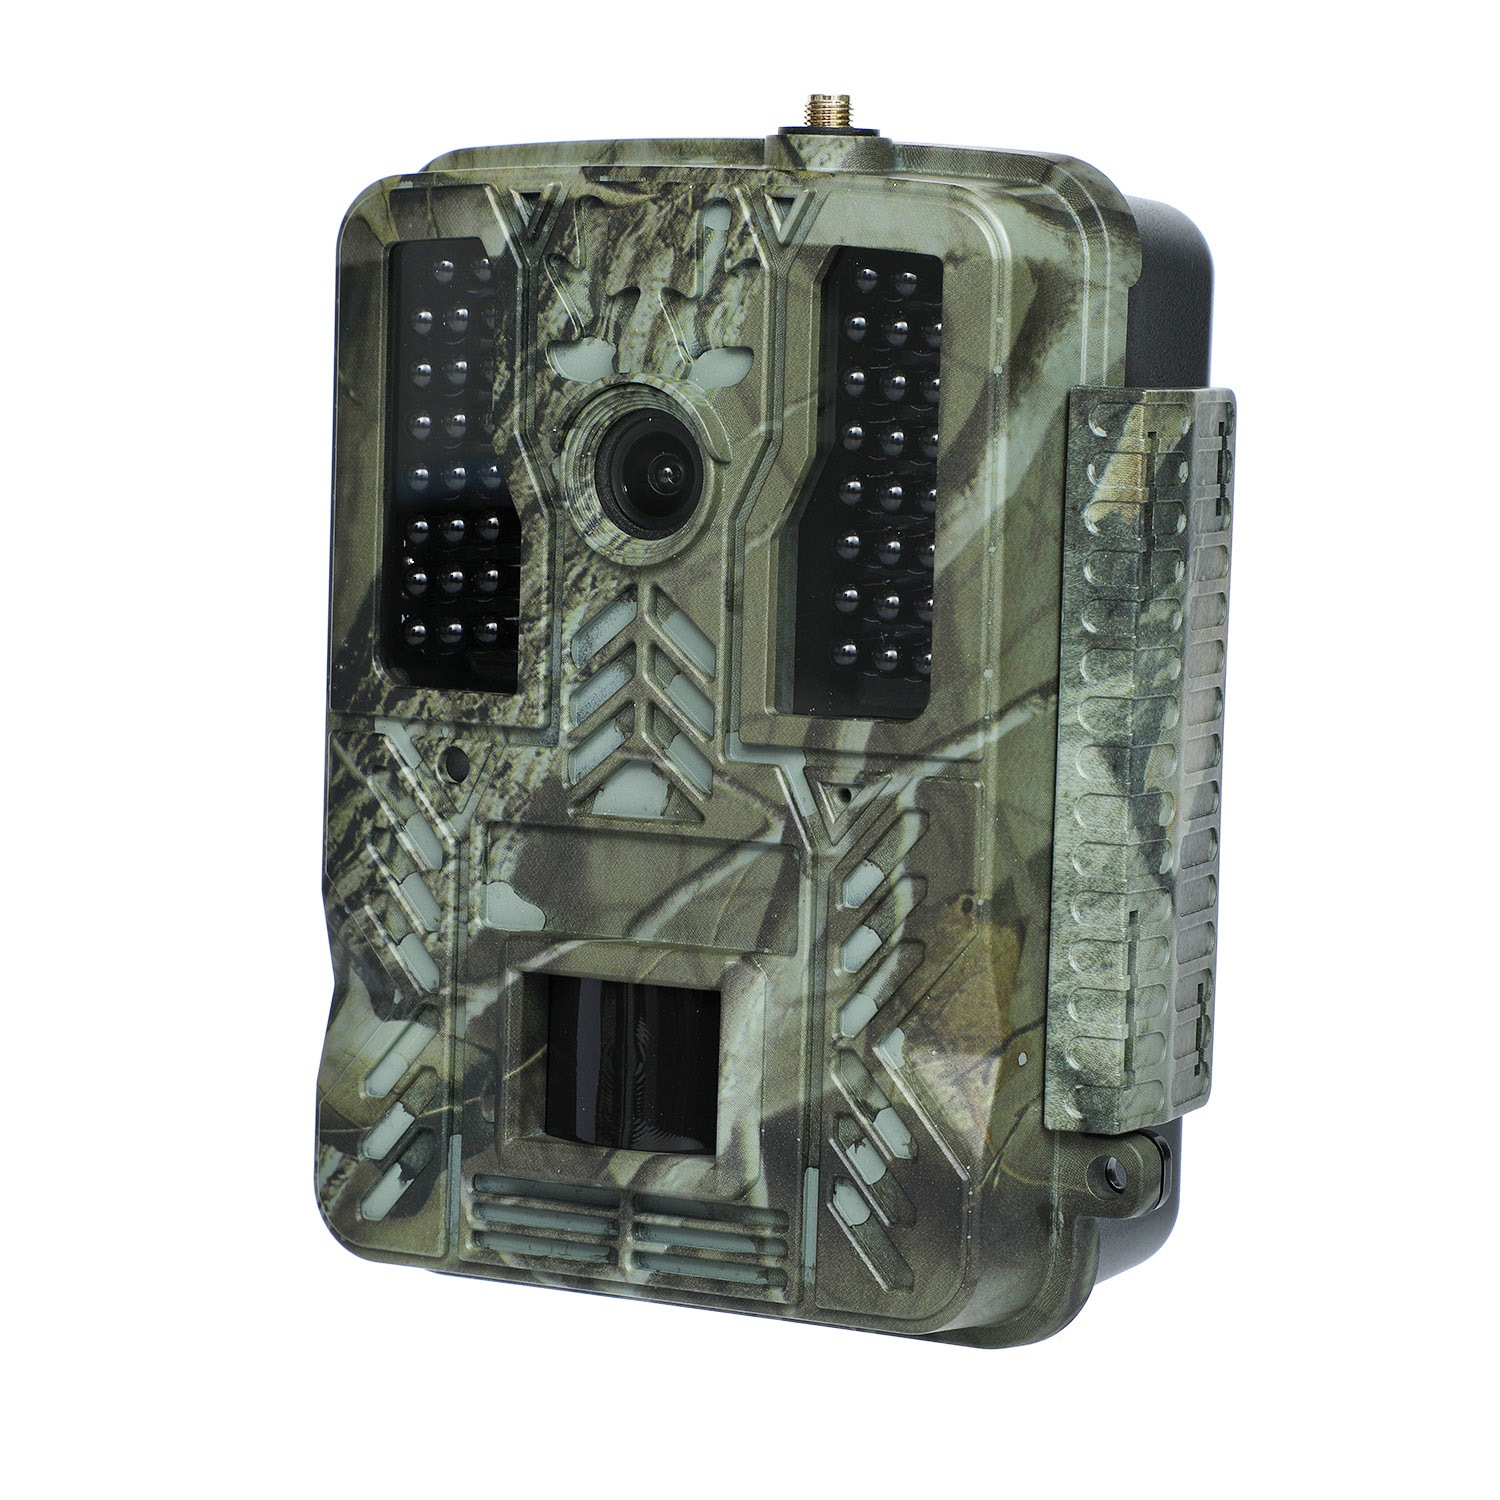 Digital Infrared Hunting Trail Camera with Night Vision&Waterproof IP67